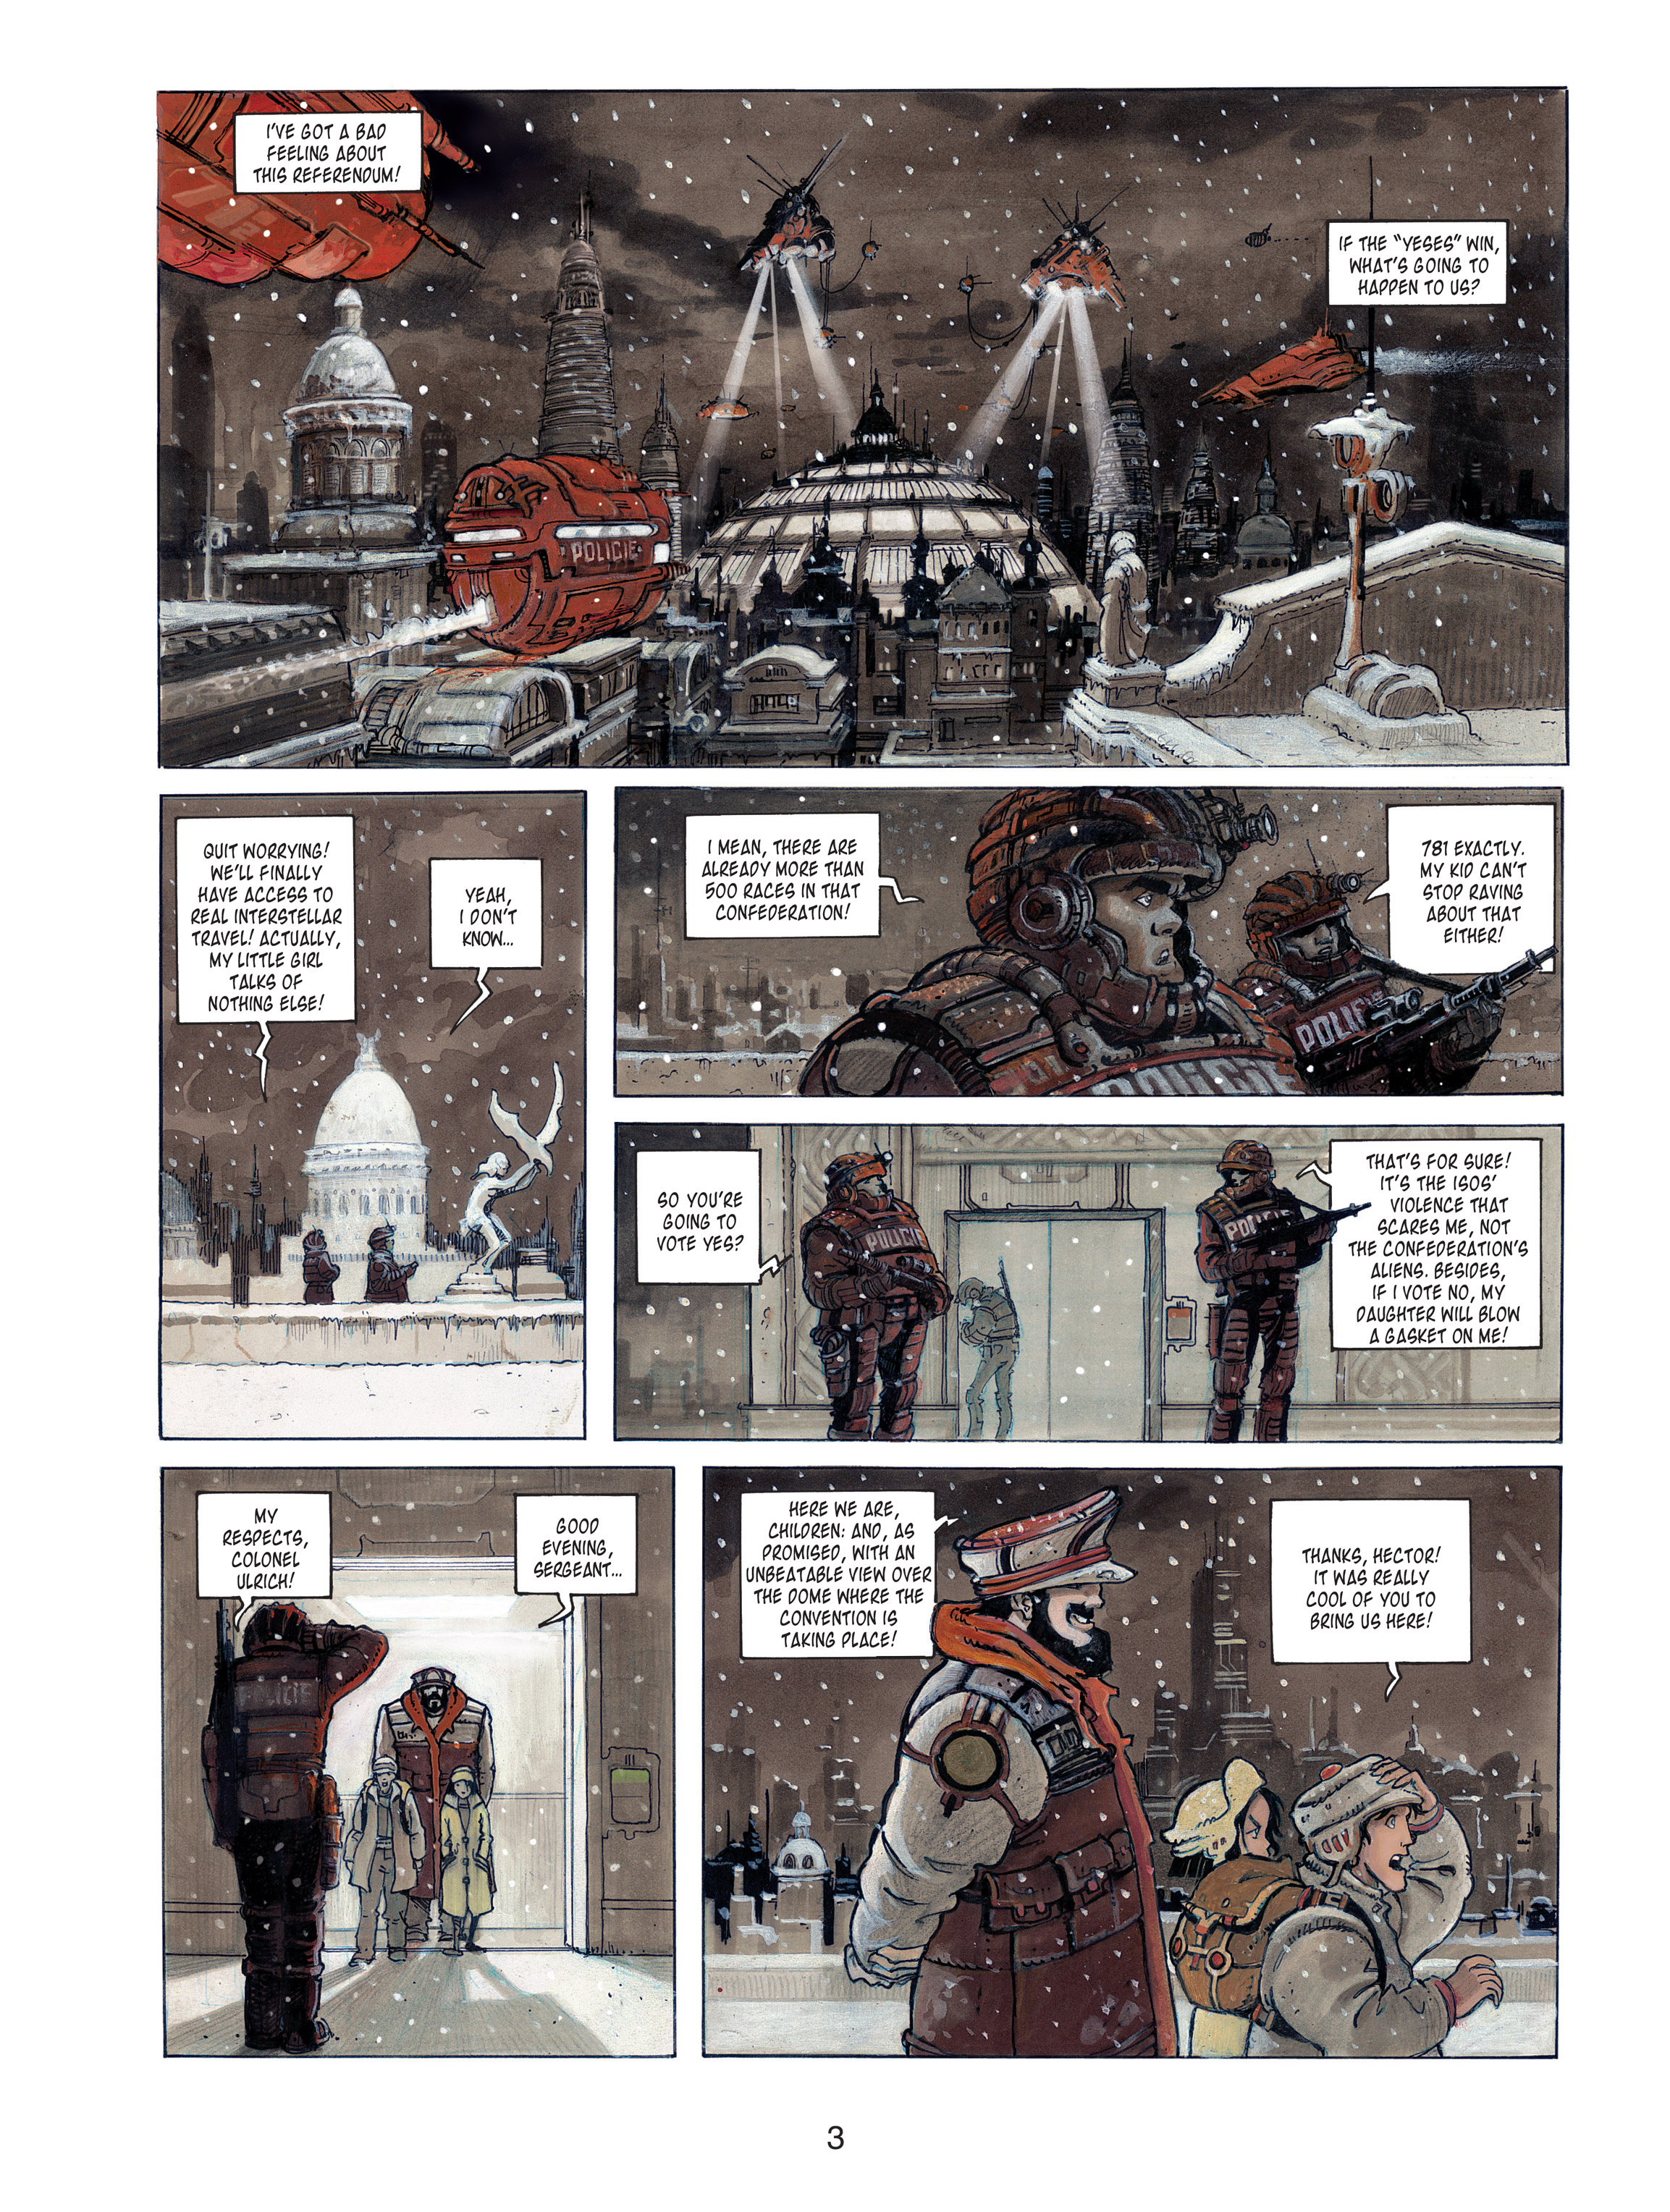 Orbital (2009-): Chapter 1 - Page 4